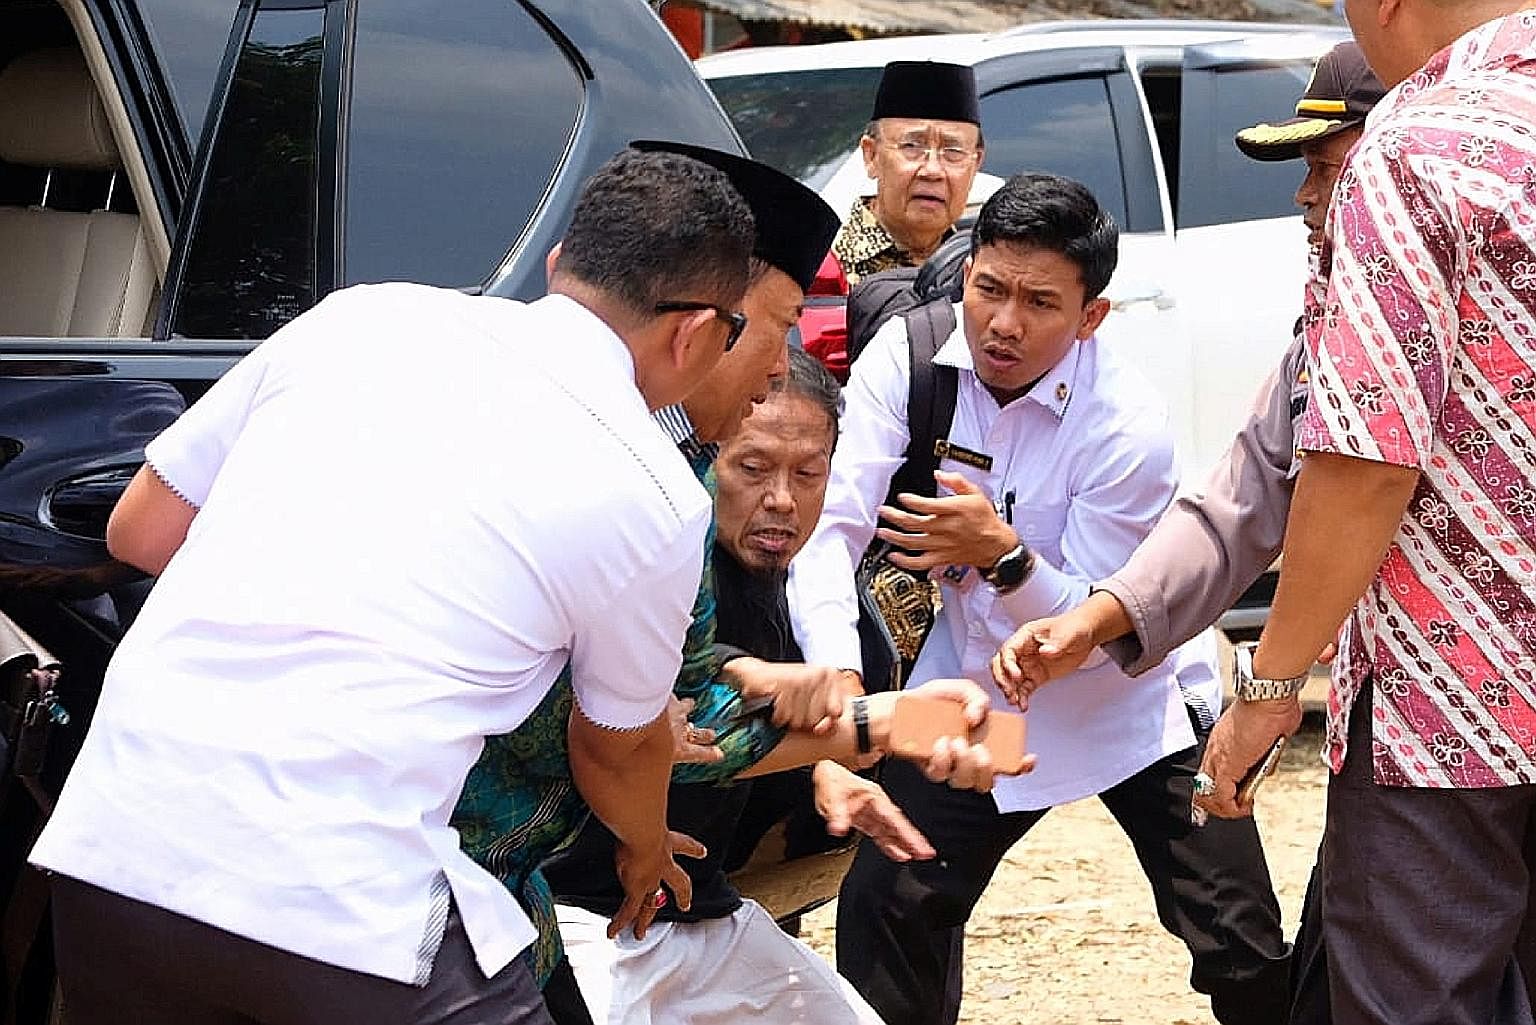 Indonesia's chief security minister Wiranto (in green) was yesterday stabbed in an attack by members of Jamaah Ansharut Daulah, the authorities said. The group is linked to the Islamic State in Iraq and Syria terror network. Mr Wiranto, the Coordinat